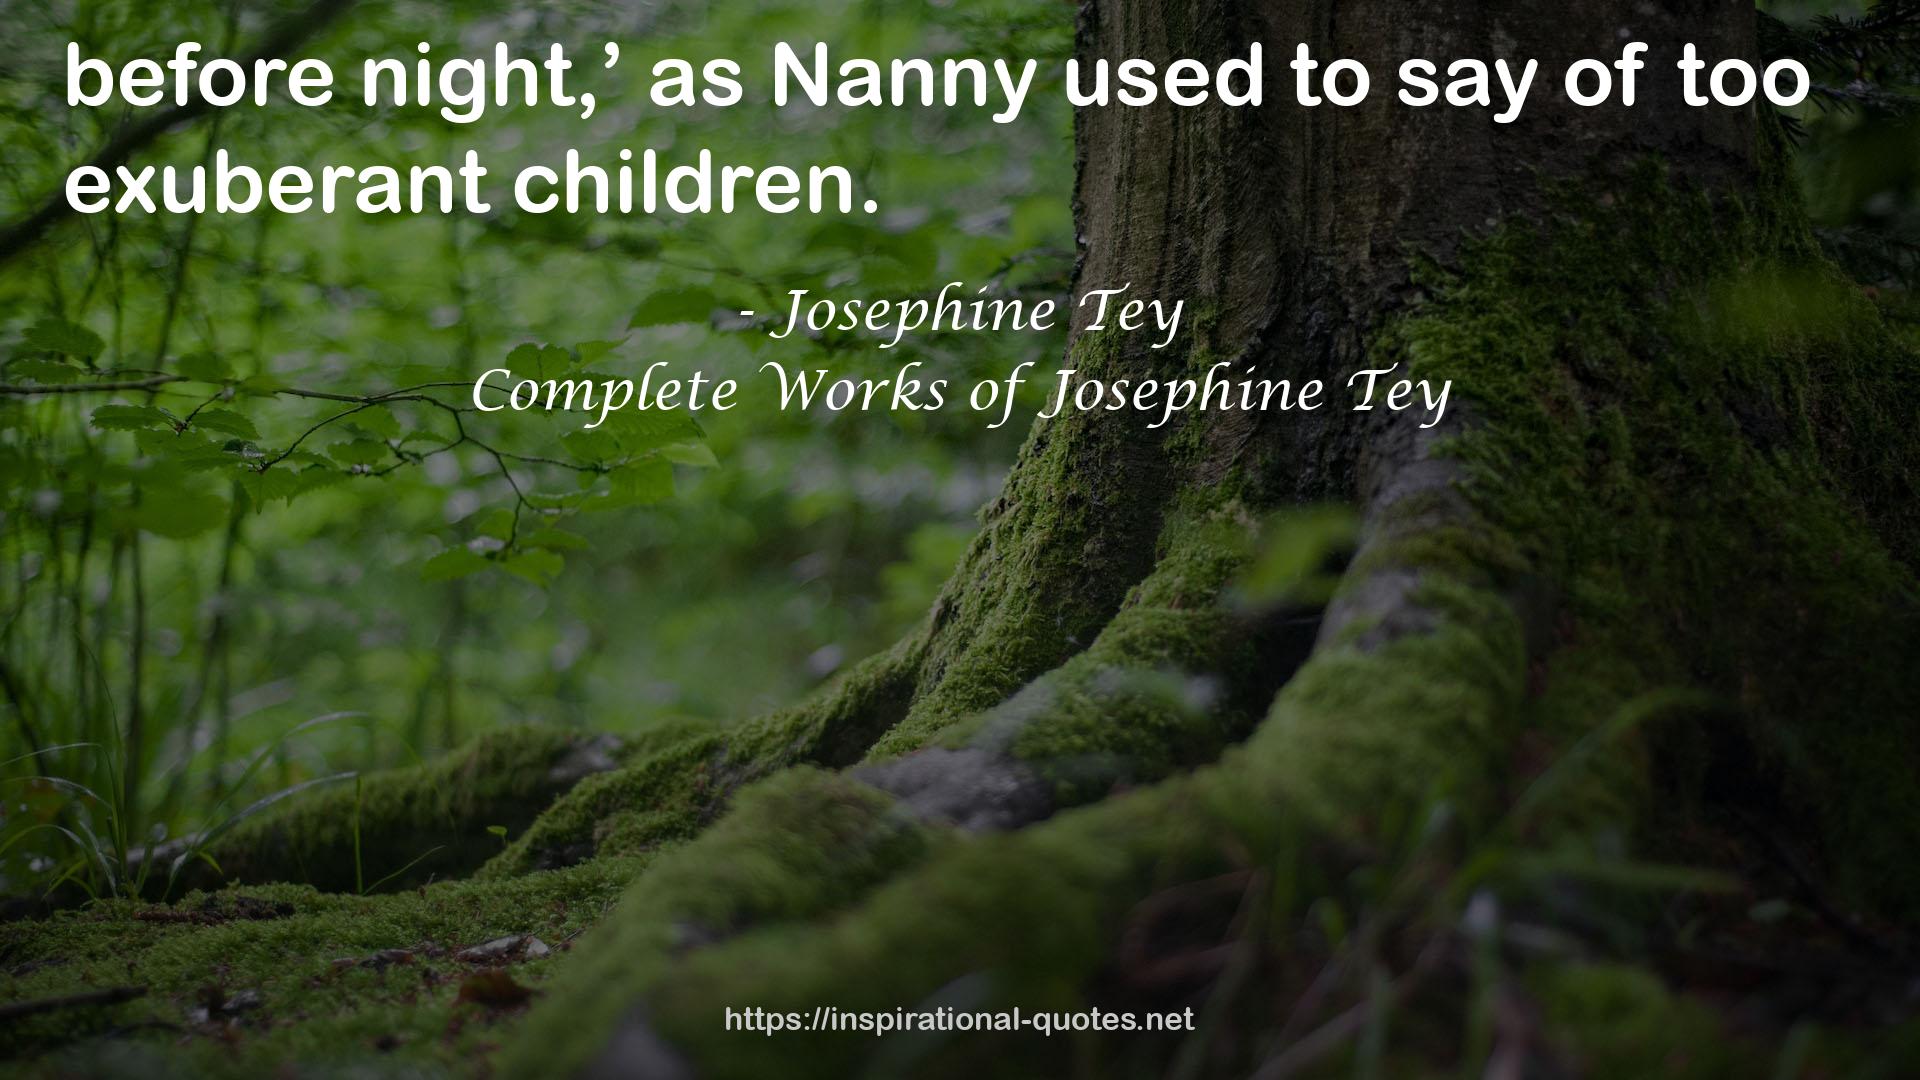 Complete Works of Josephine Tey QUOTES